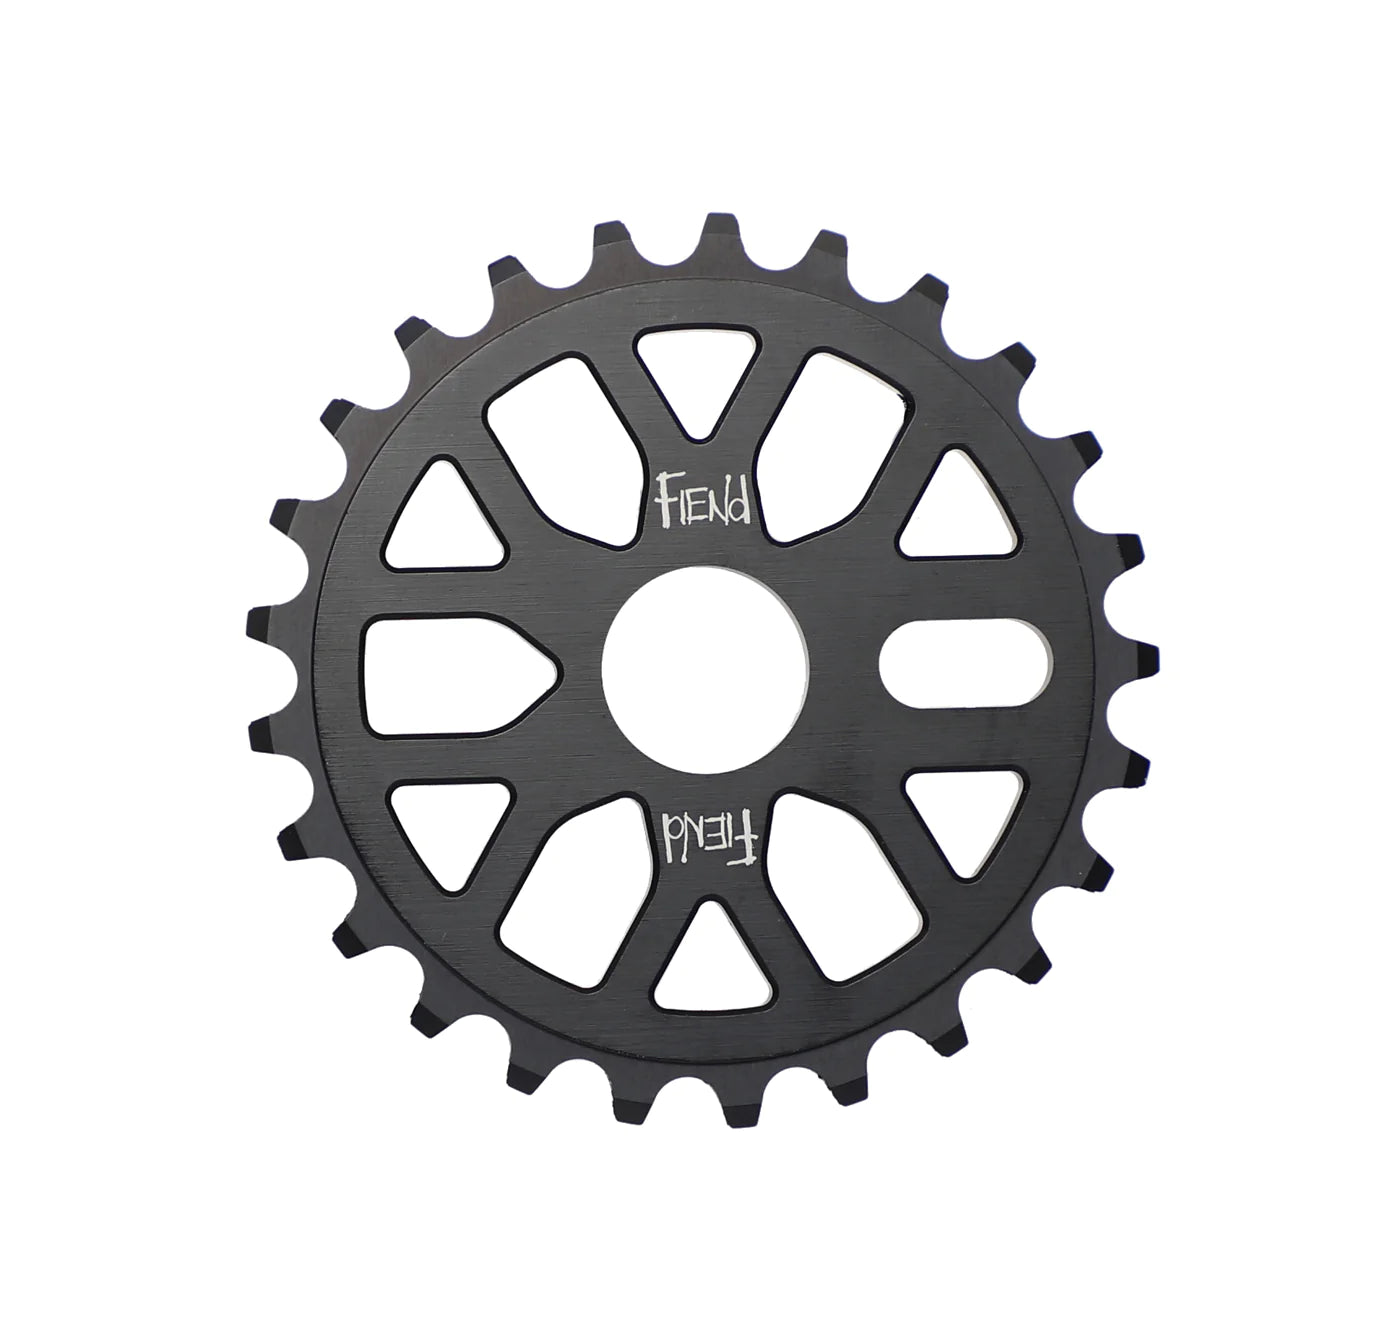 Front view of the Fiend Omni Sprocket in black